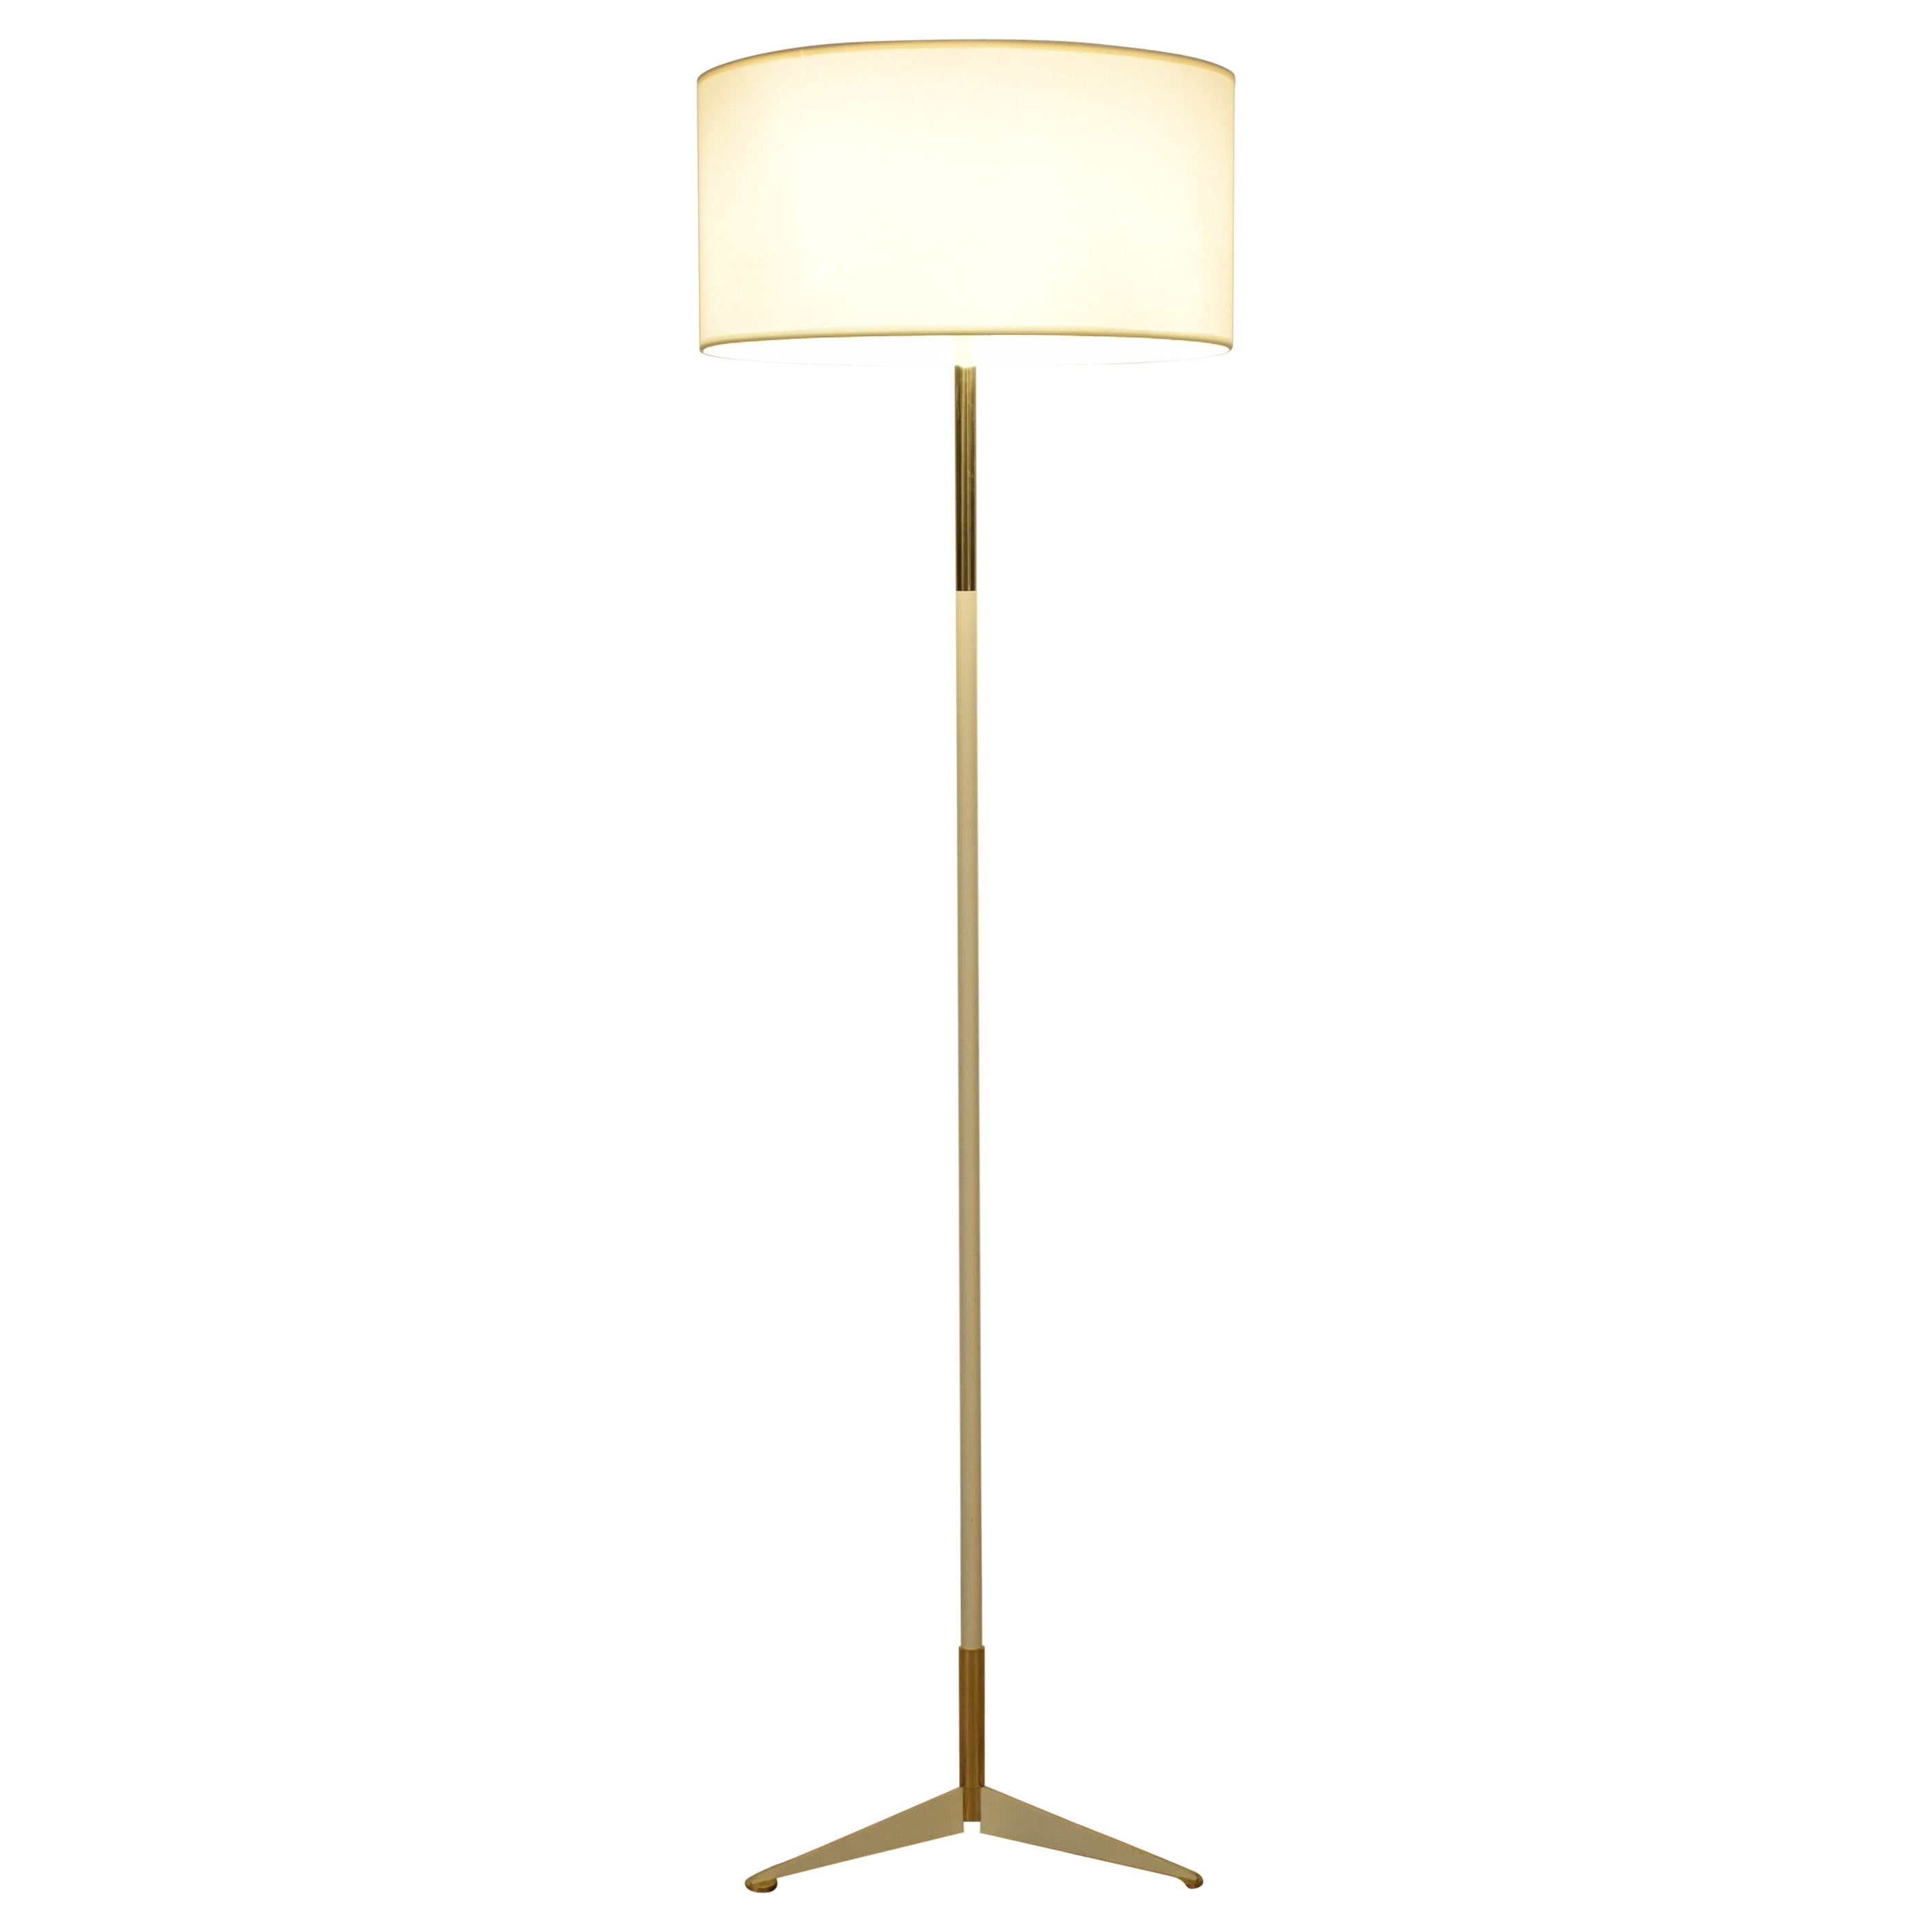 Midcentury Brass and Lacquered Metal Floor Lamp